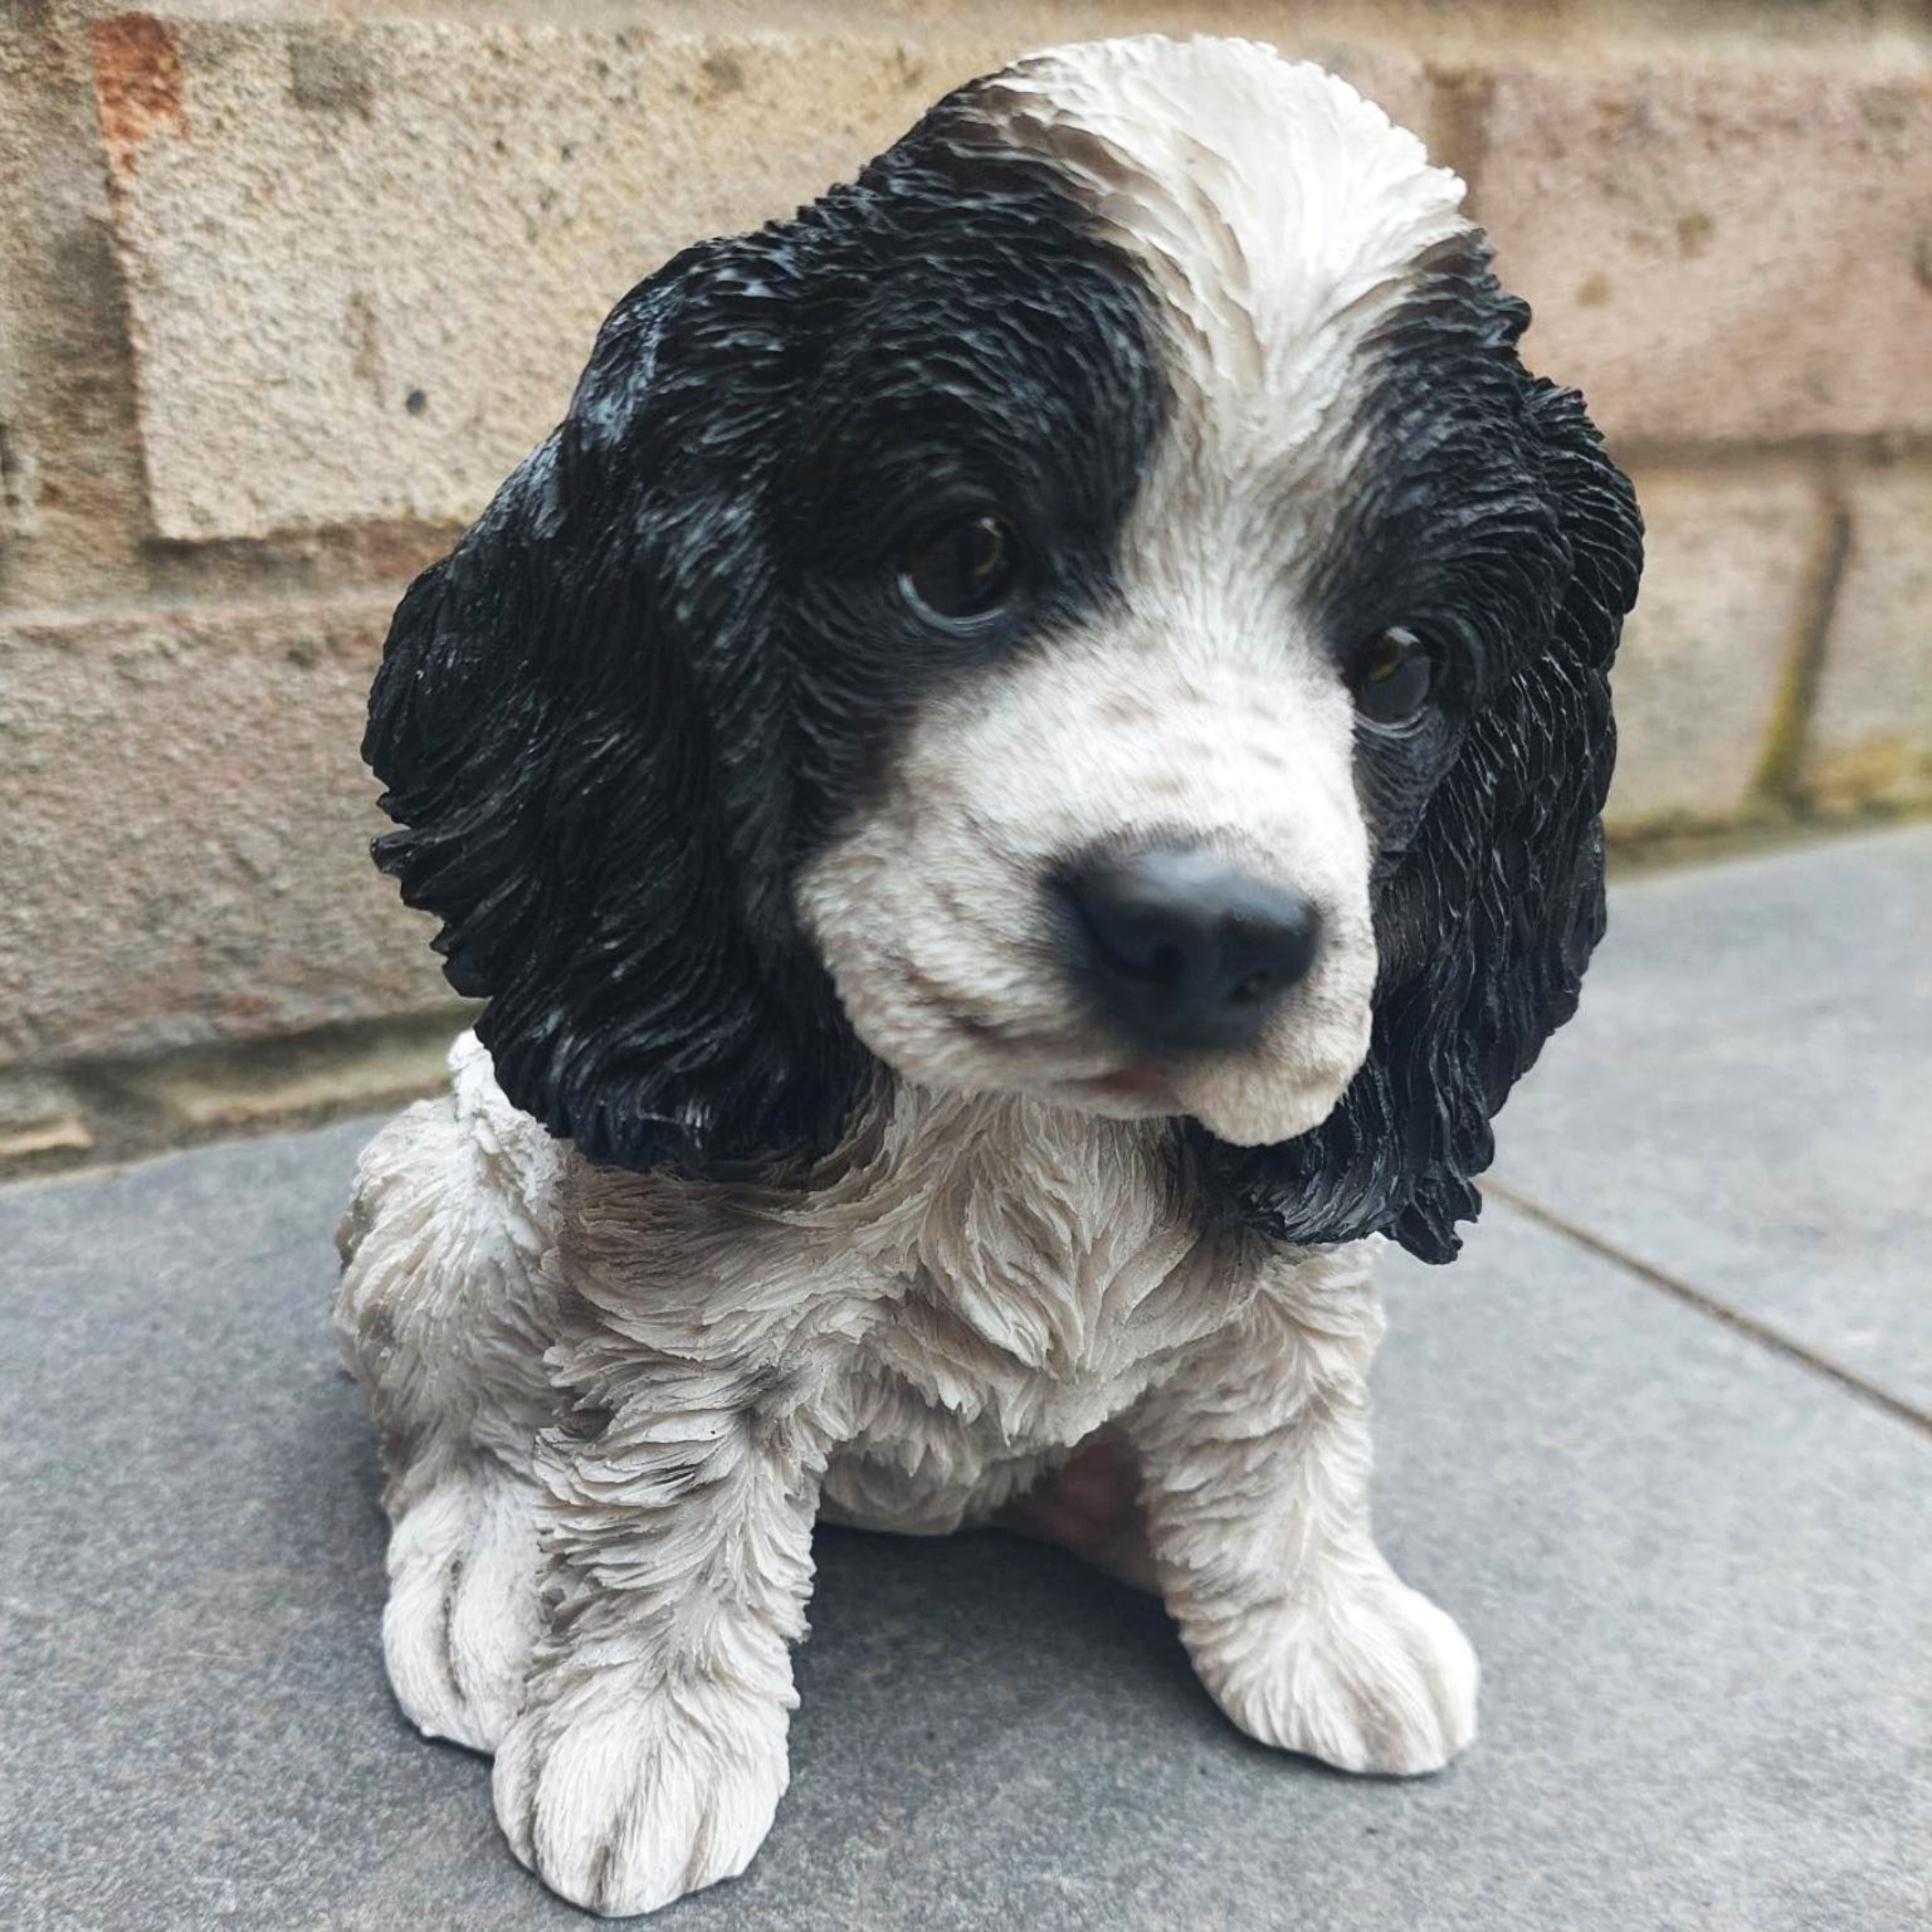 Black and White Cocker Spaniel Puppy Garden or Home Ornament - Image 5 of 5